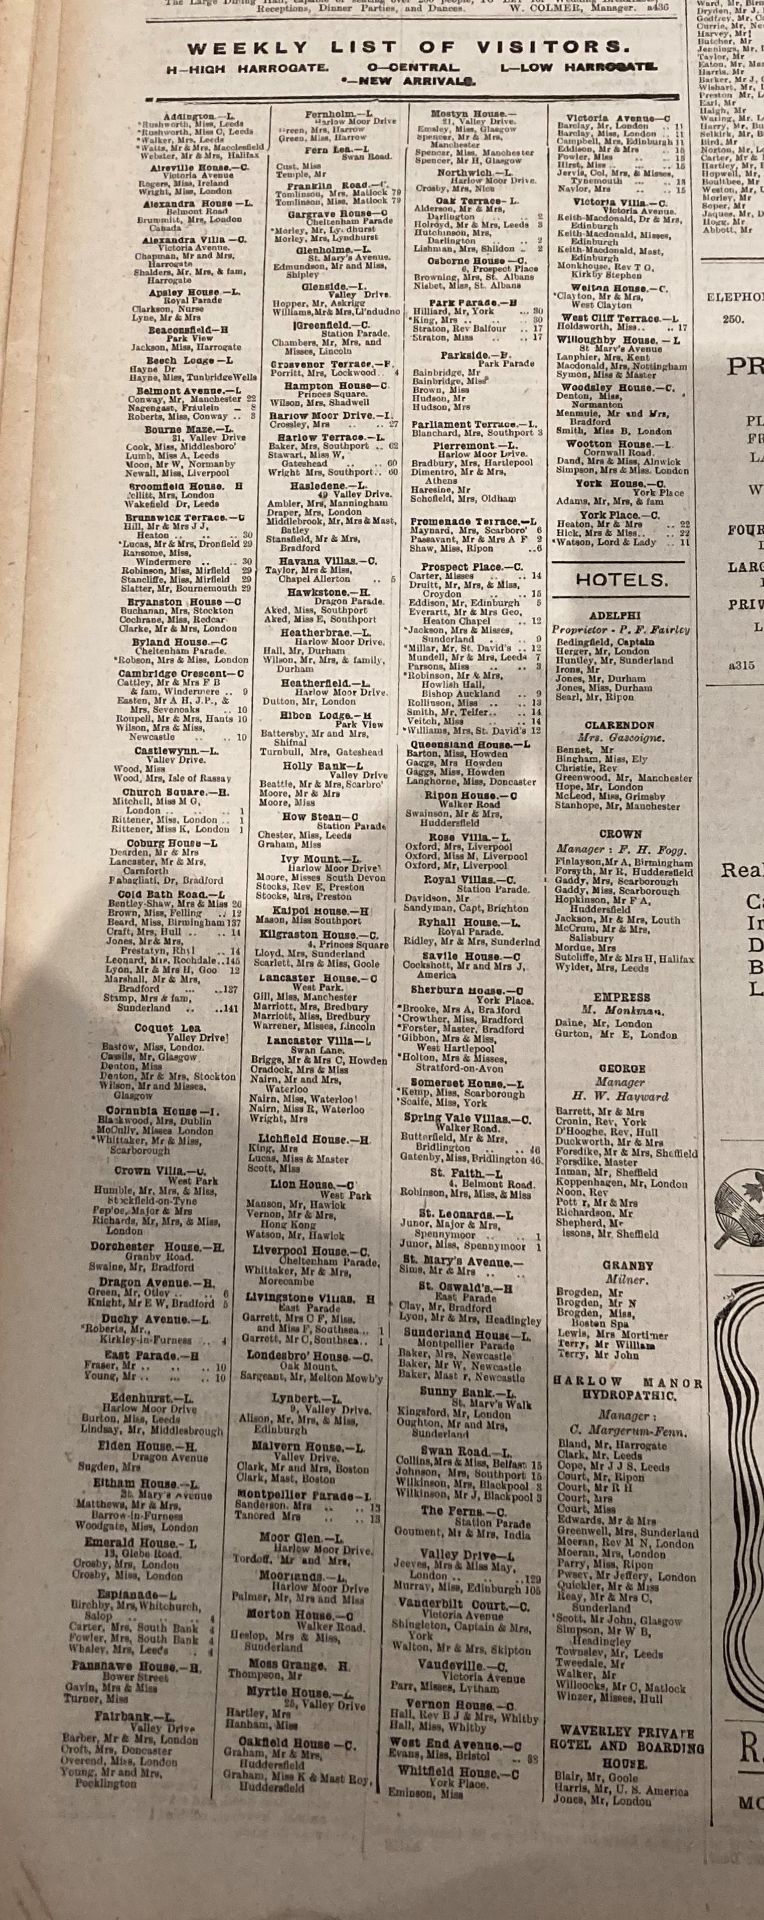 The Harrogate Advertiser and List of Visitors 66th Year of Publication - Sat Jan 4th 1902 - price - Image 10 of 11